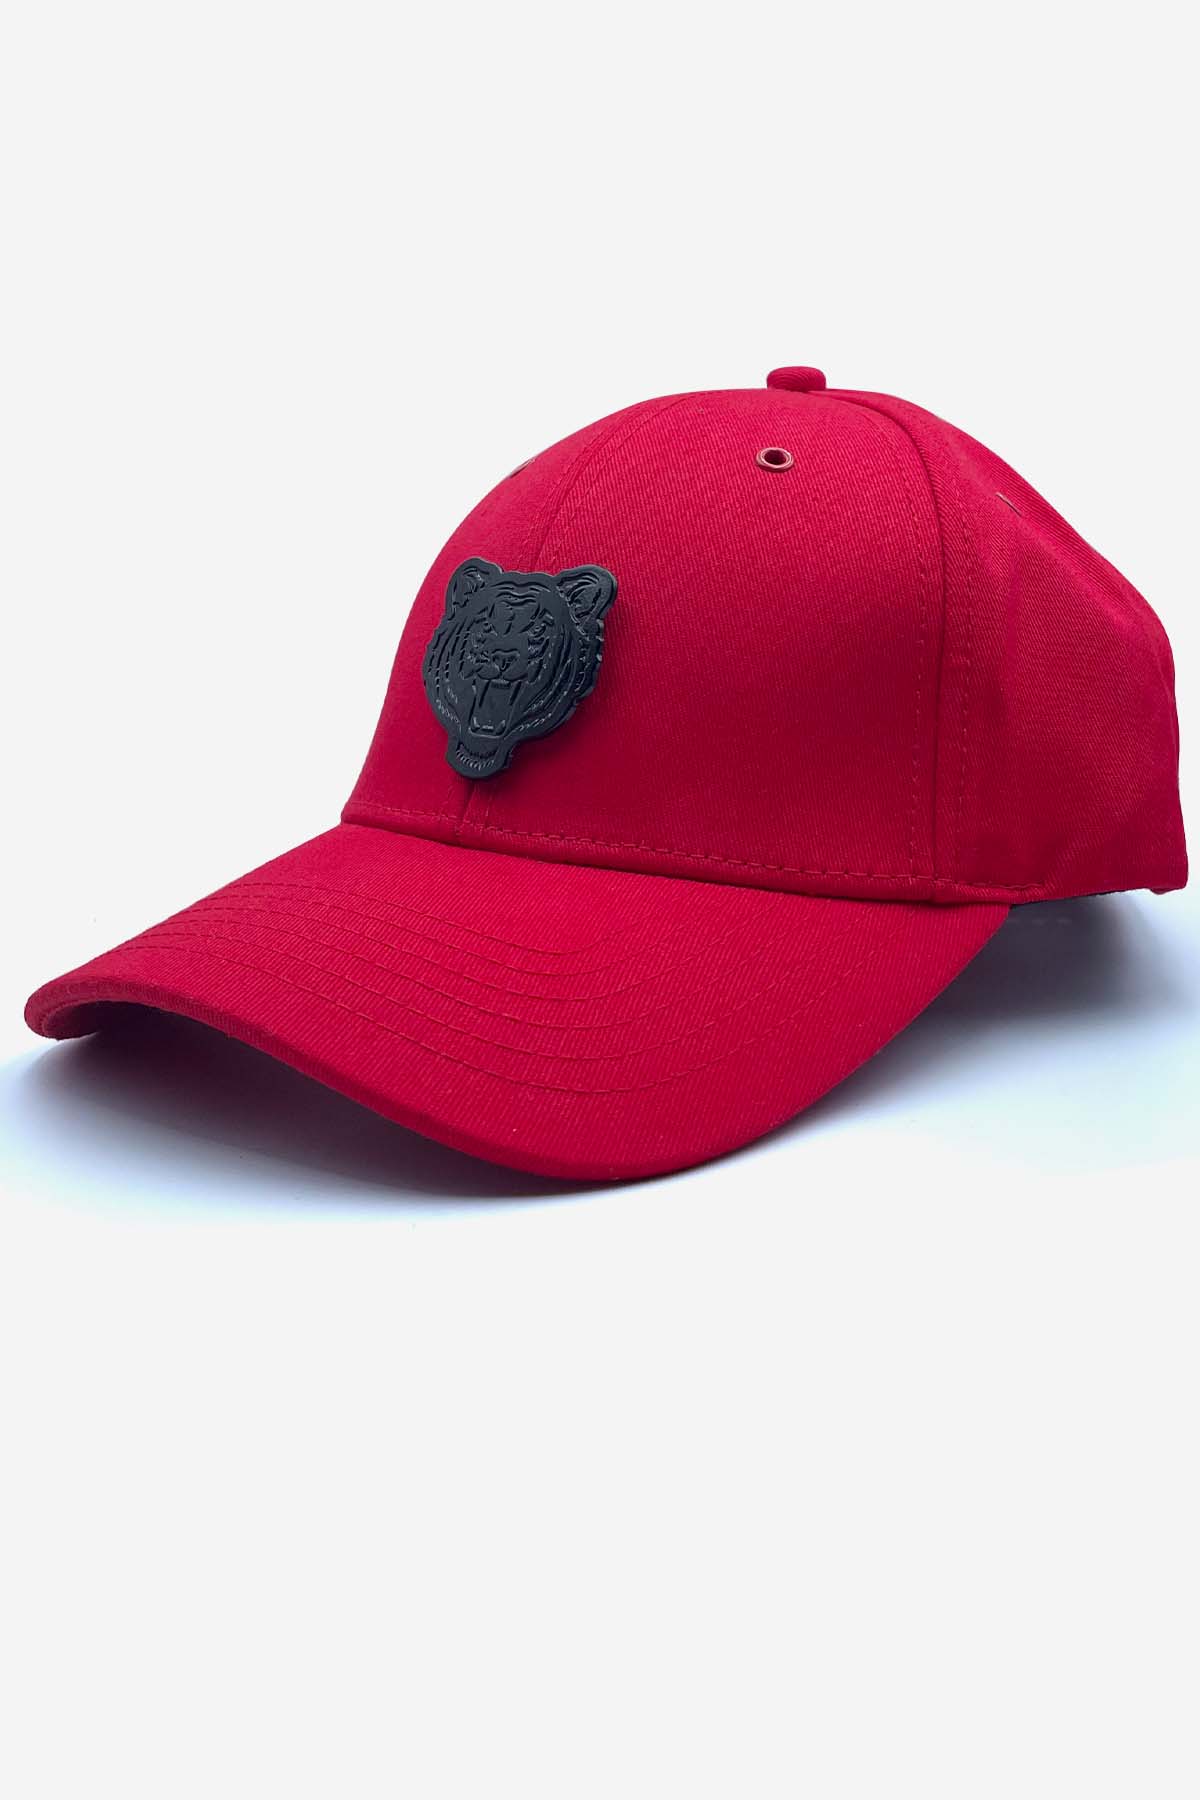 RED TIGER CAP WITH BLACK LOGO